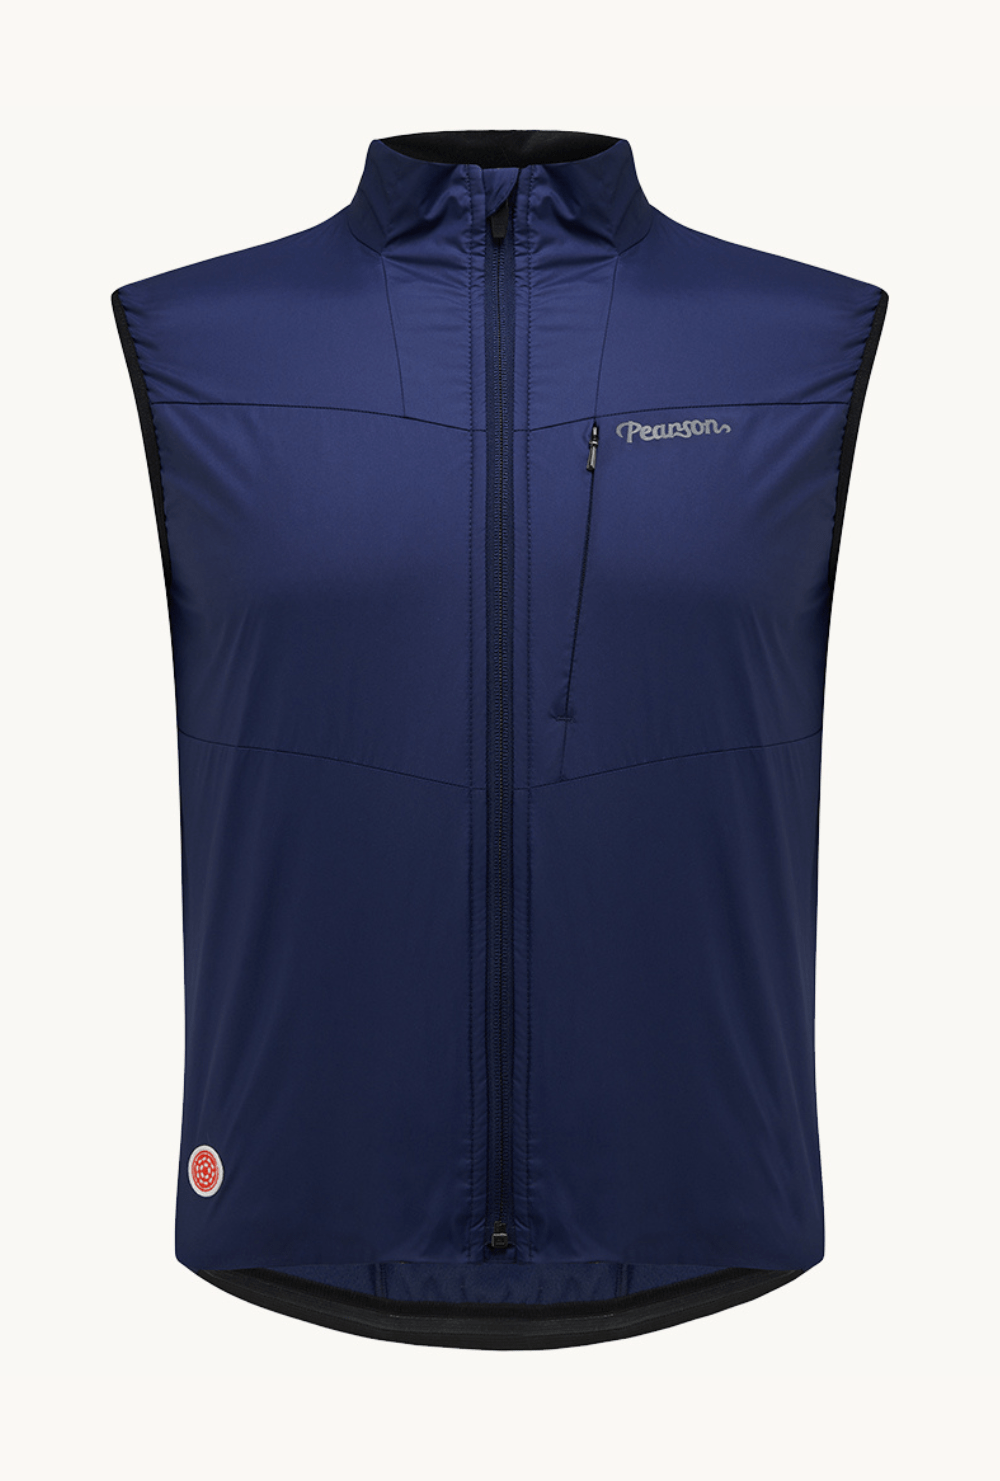 Pearson 1860  Feel The Benefits - Road Insulated Gilet Blue Ink  Small / Blue Ink